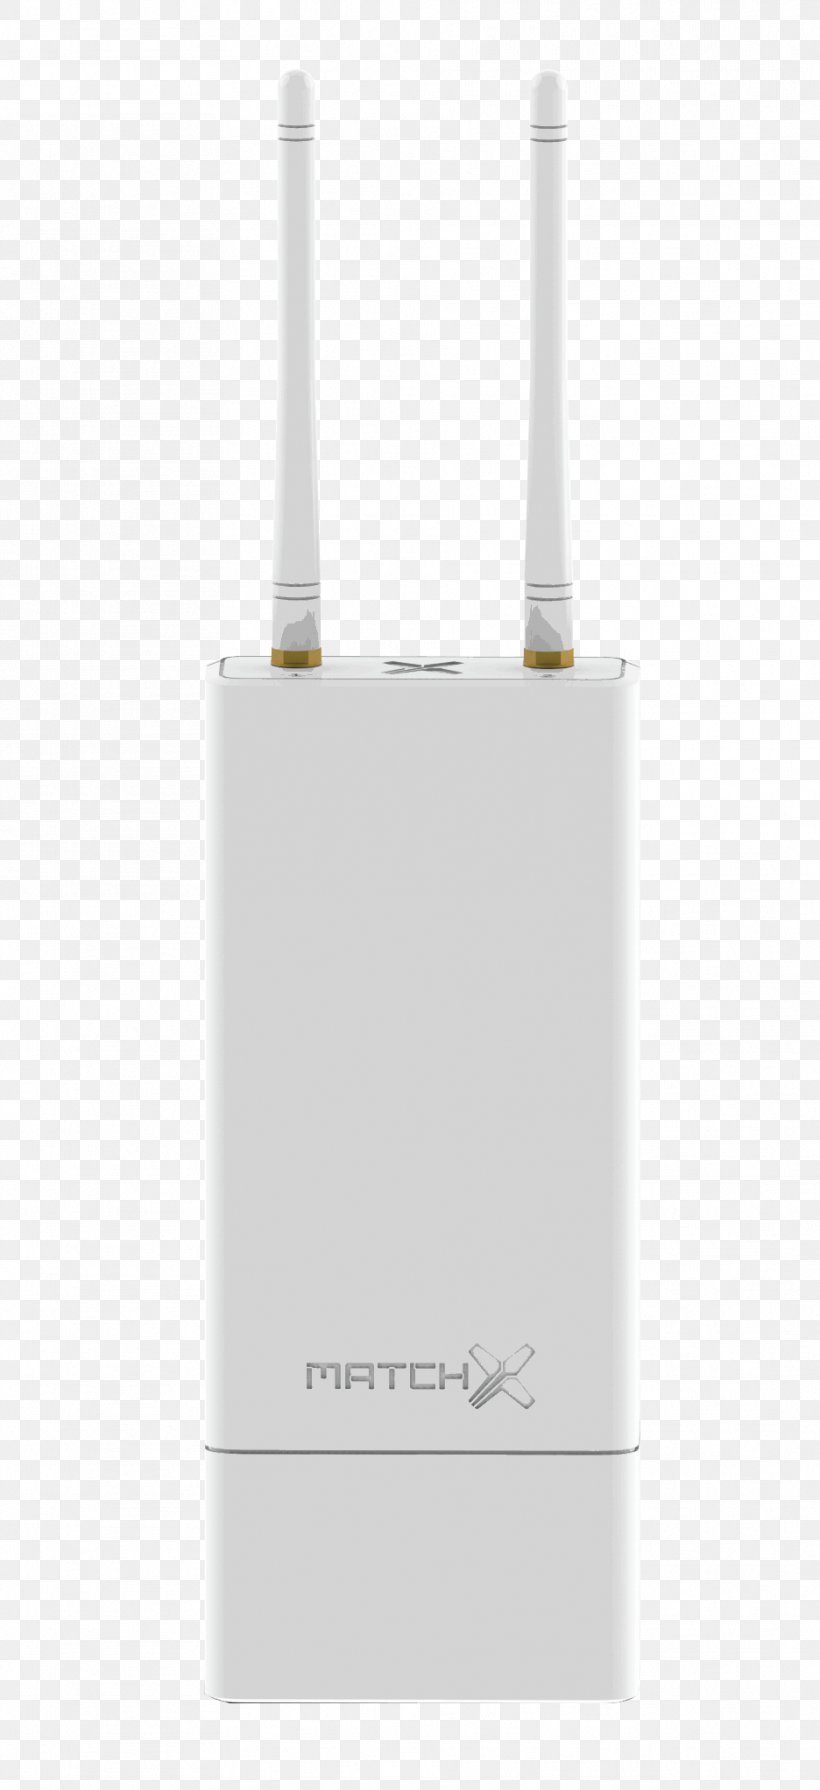 Technology Wireless Access Points Electronics, PNG, 936x2044px, Technology, Electronics, White, Wireless, Wireless Access Point Download Free